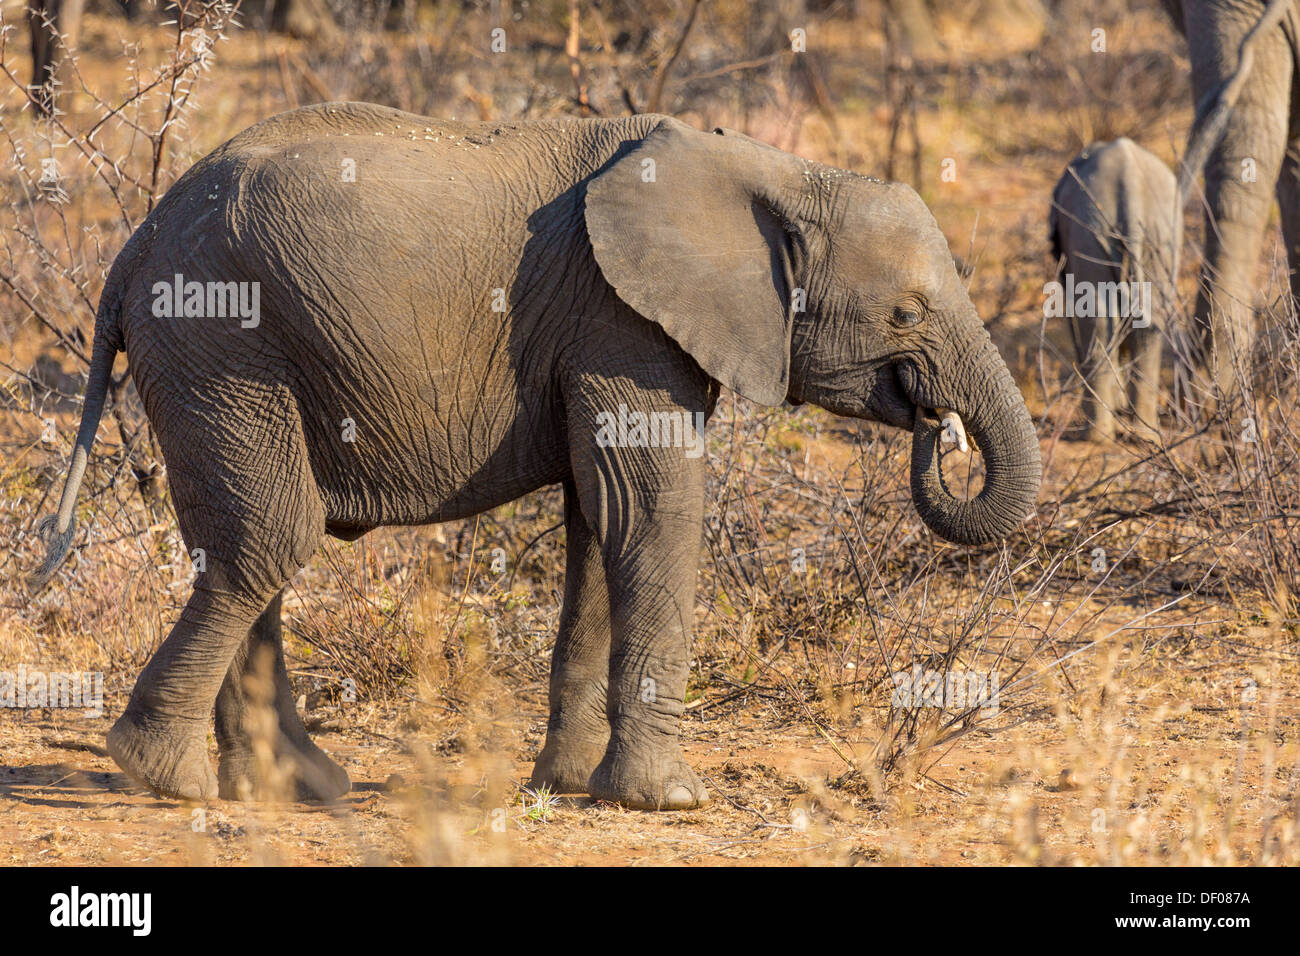 A very young elephant wandering in the grasslands of South Africa's Pilanesberg National Park Stock Photo